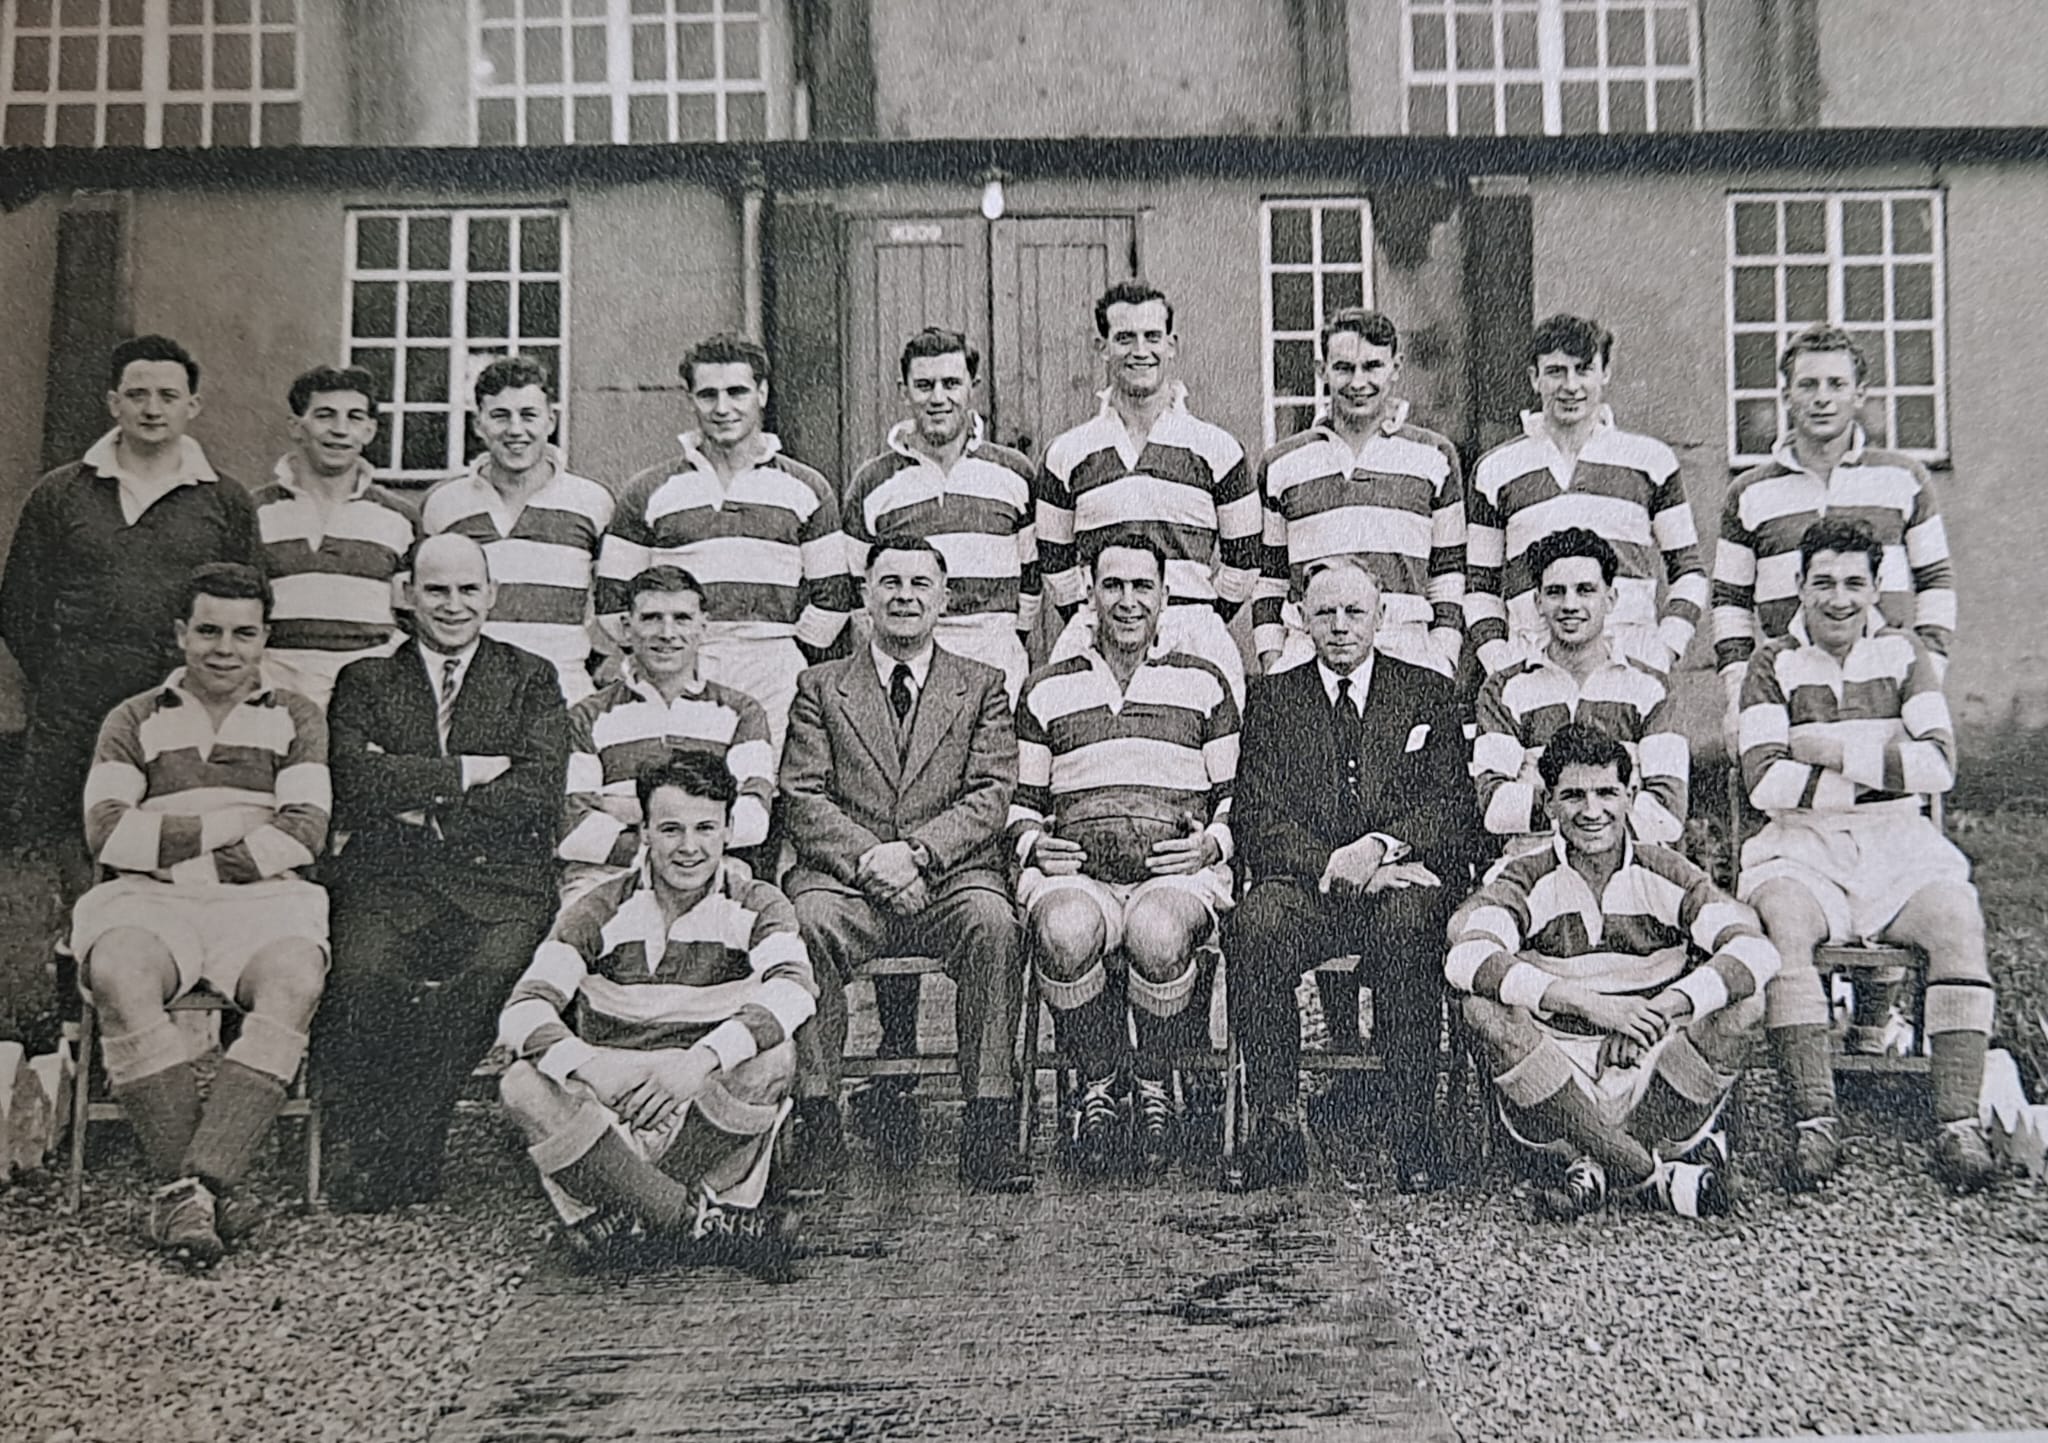 Colin Evans lines up in Gorseinon RFC team photo. Colin is standing fifth from the left while Malcolm Halfpenny, grandfather of Leigh Halfpenny, is seated far left.